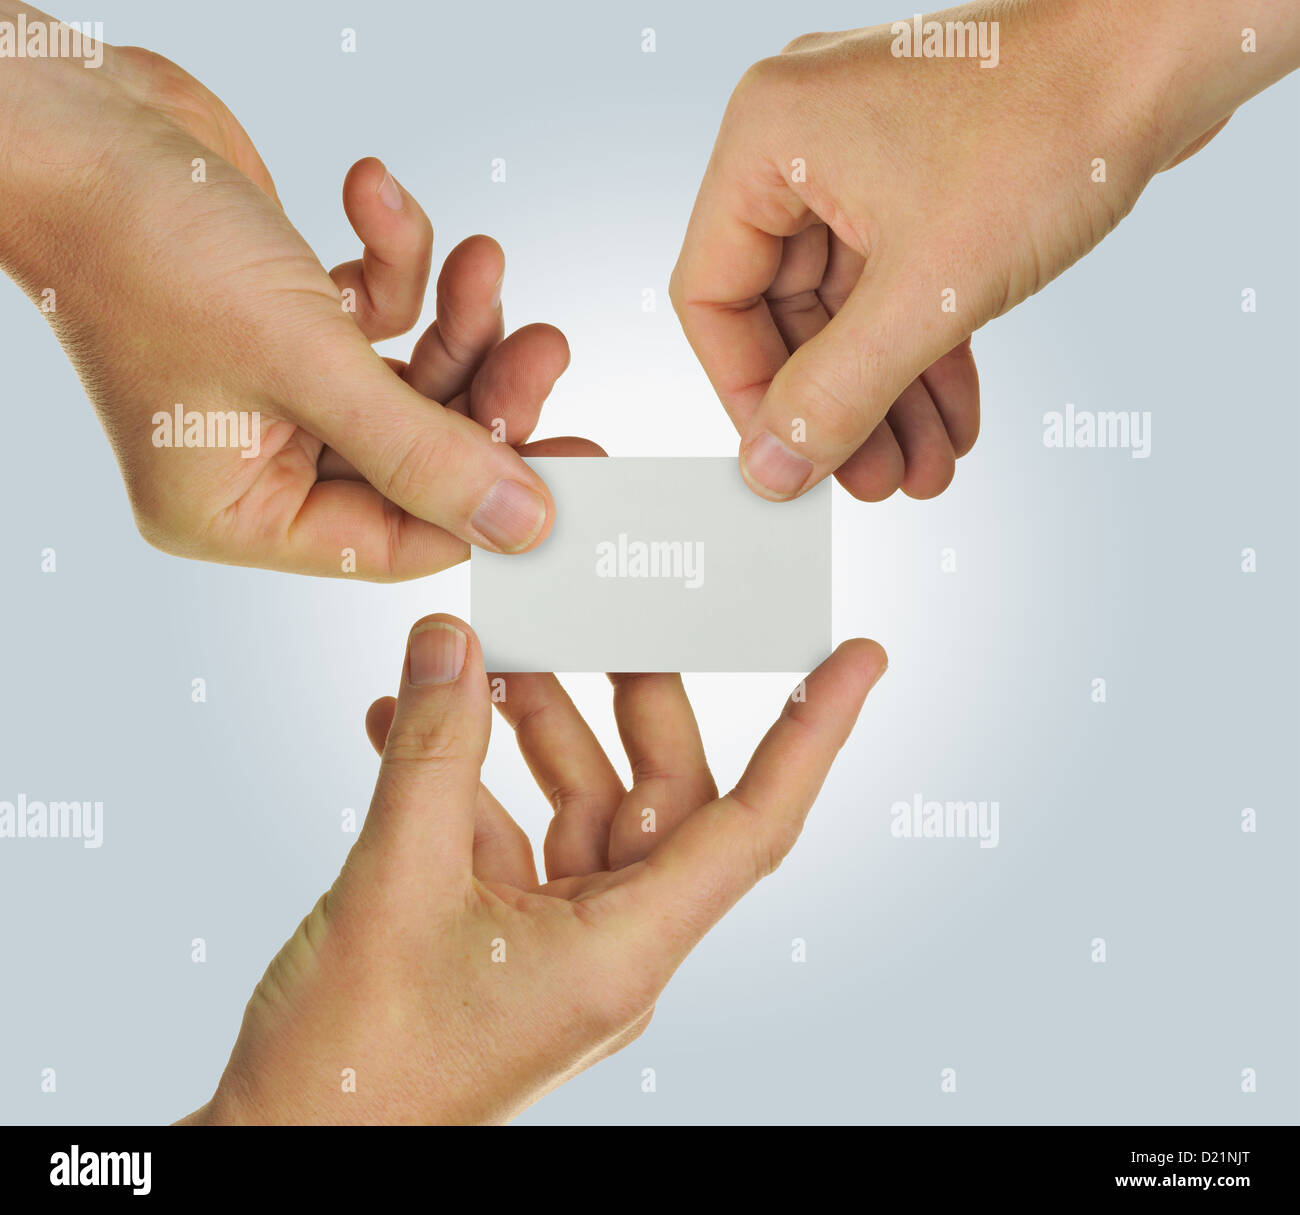 Hands holding a blank business card representing teamwork Stock Photo